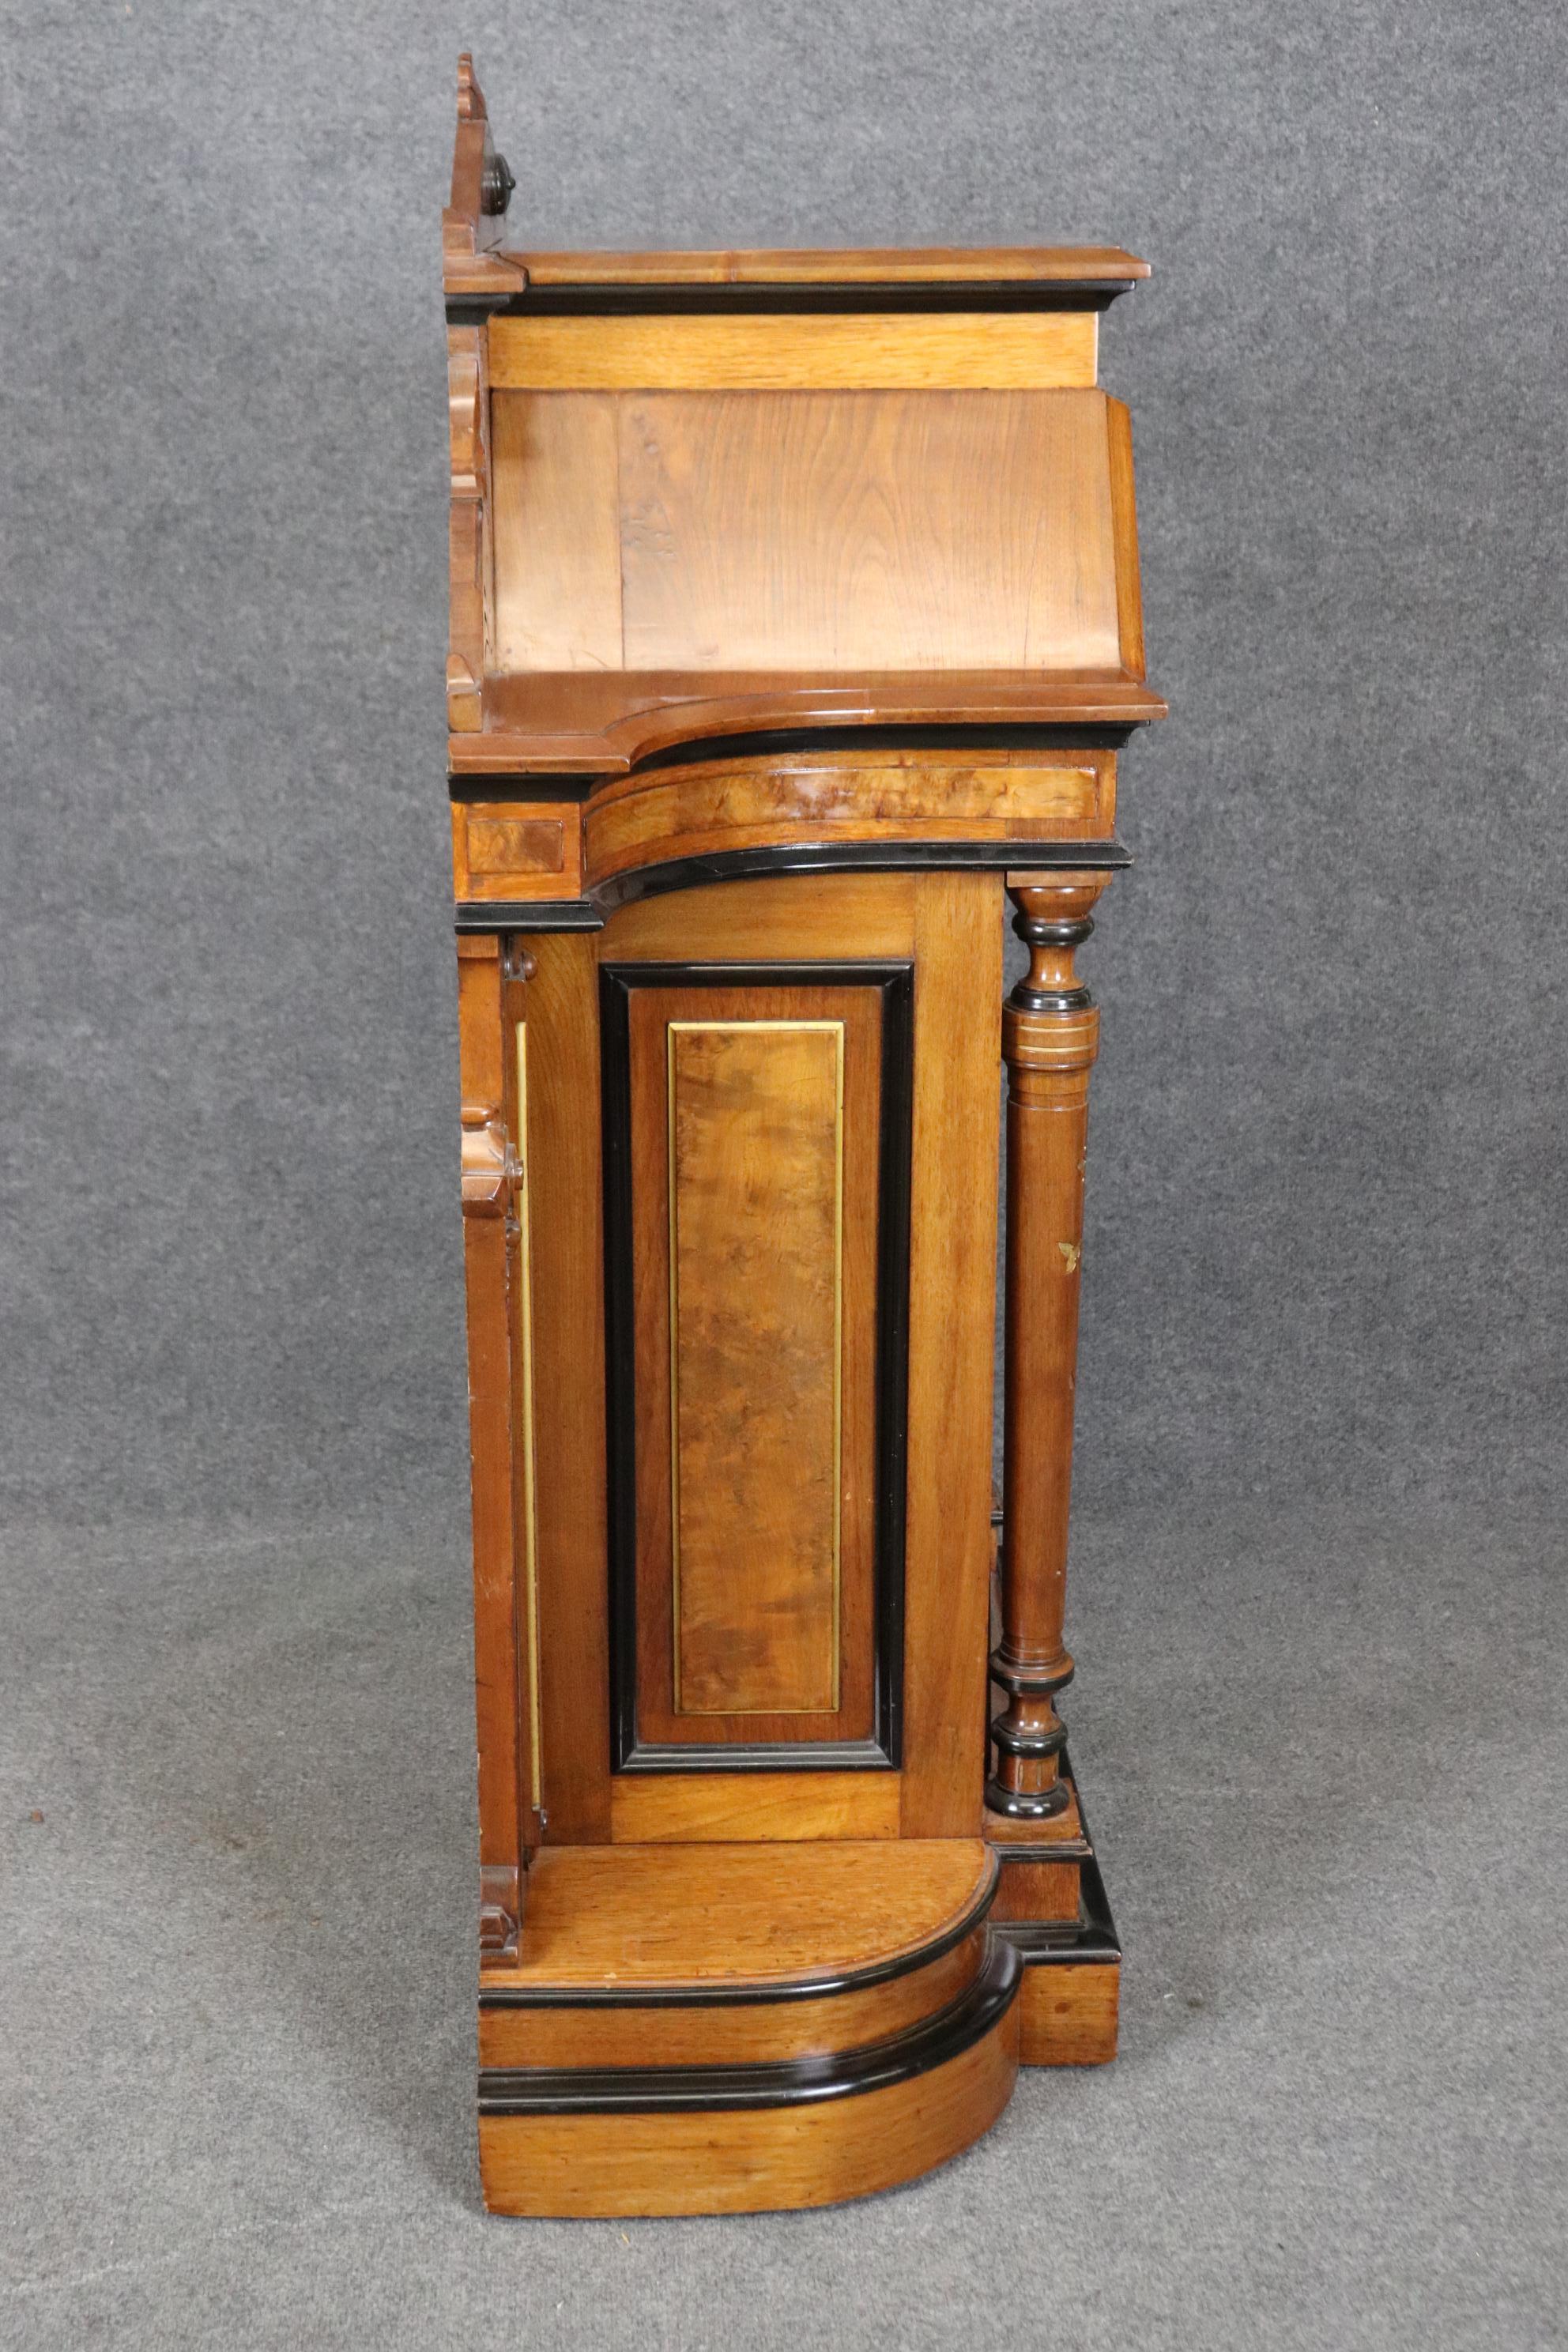 Rare Pair of American Renaissance Revival American Victorian Pedestal Cabinets  For Sale 2